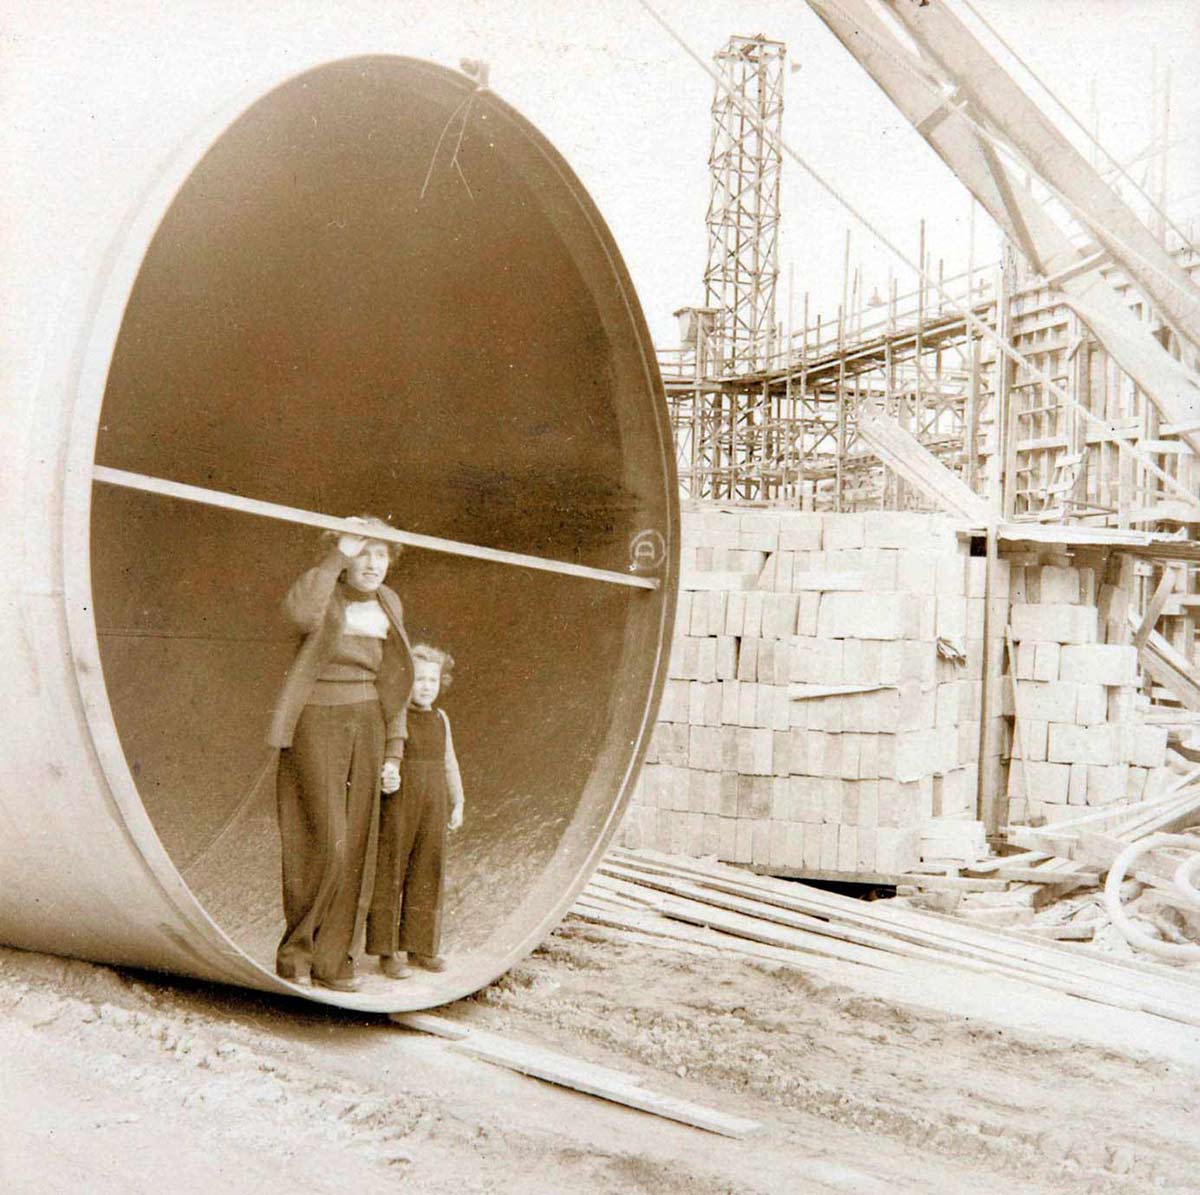 Photograph of a woman and a young girl standing inside the open end of a very large pipe at a building site. - click to view larger image